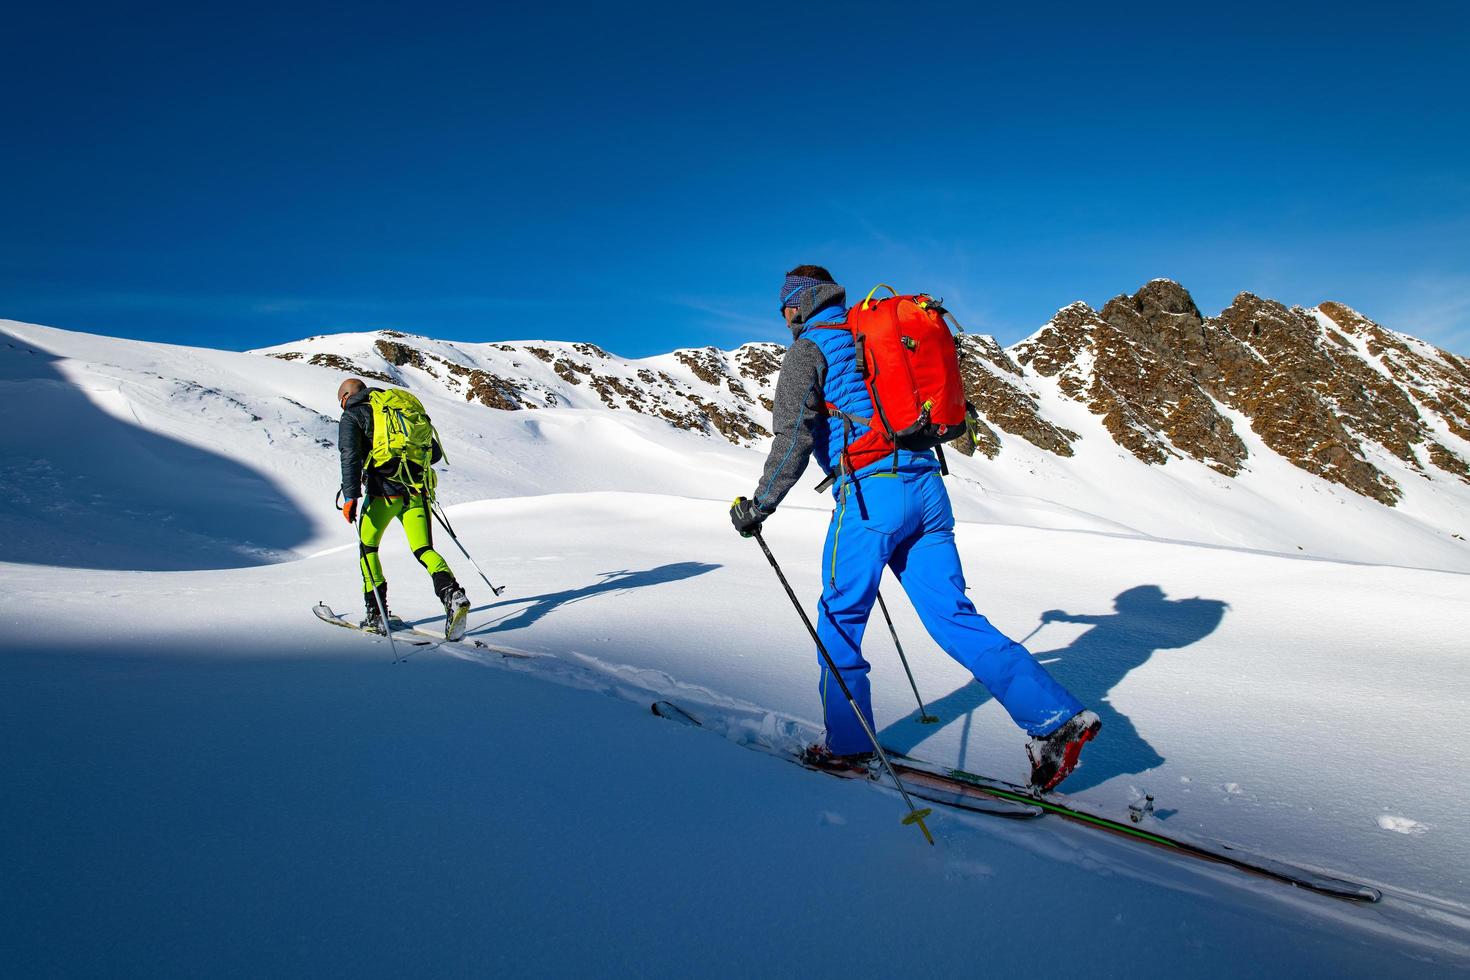 Two alpinist skiers during a ski mountaineering trip photo